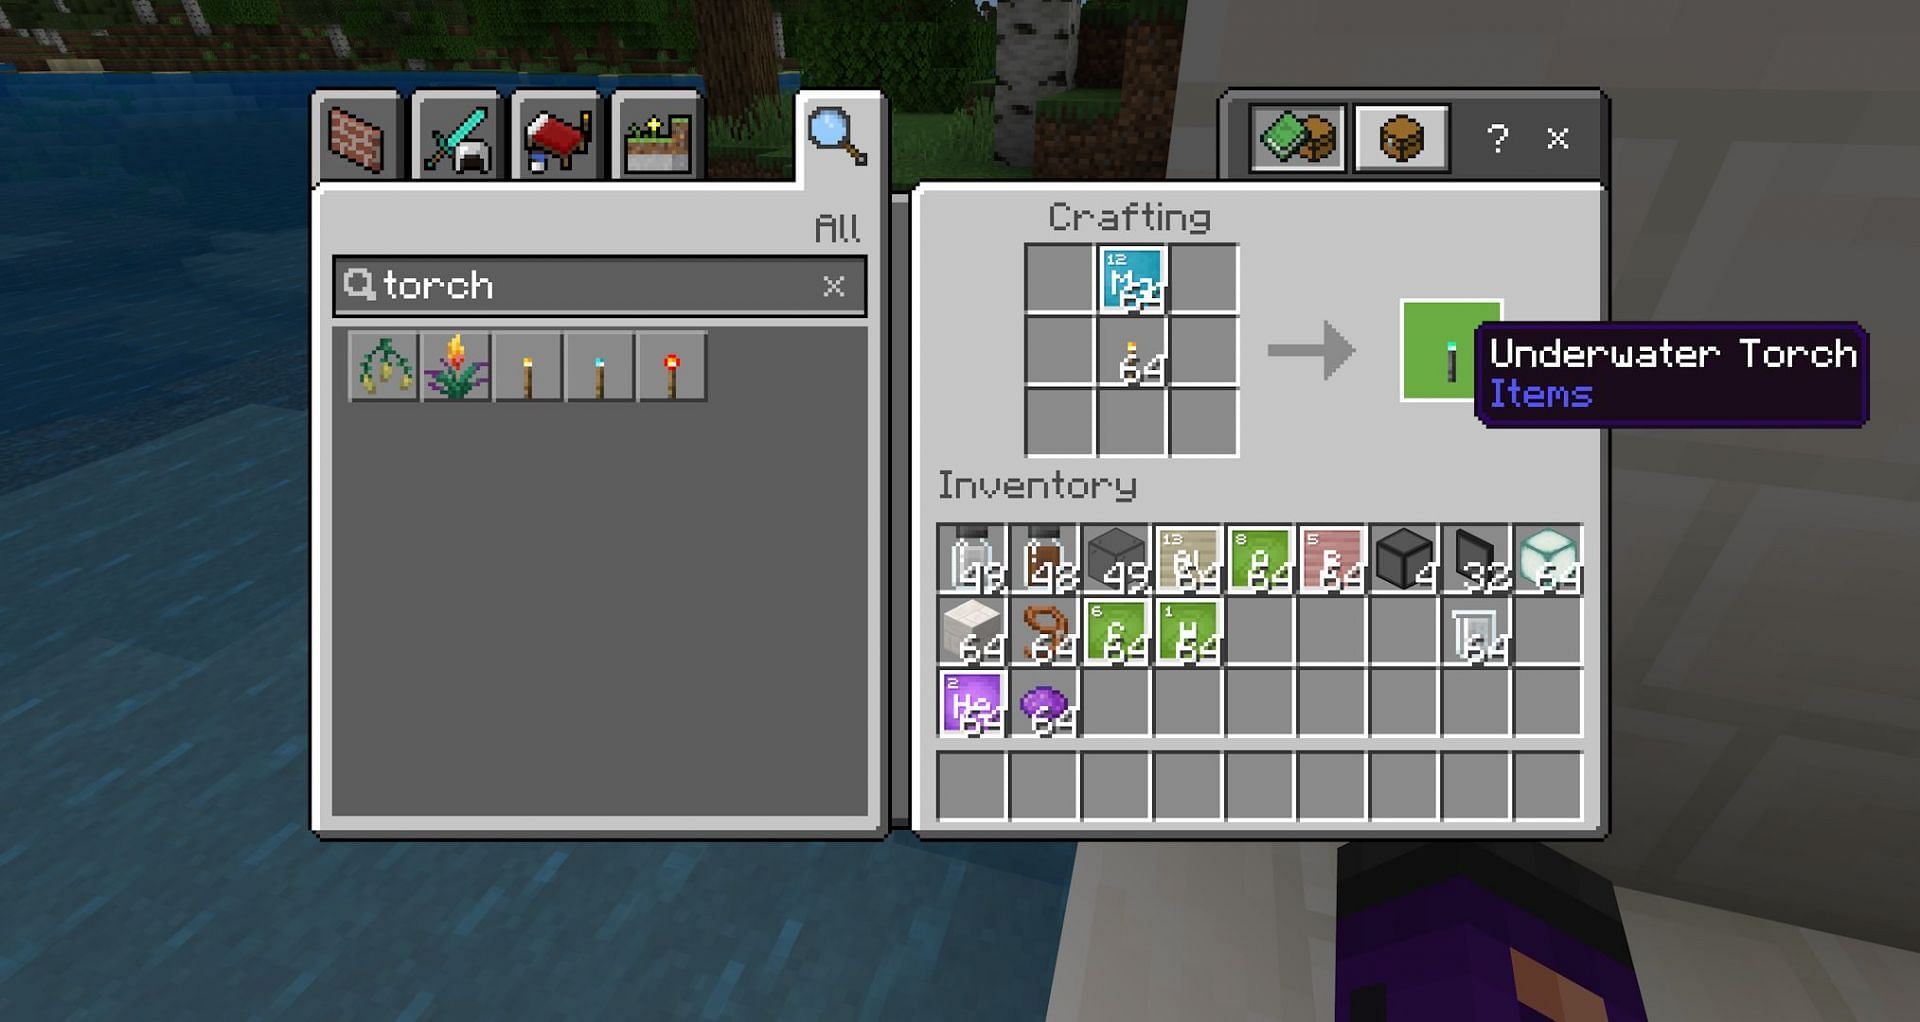 Underwater torches could quickly become a staple exploration item (Image via Mojang Studios)